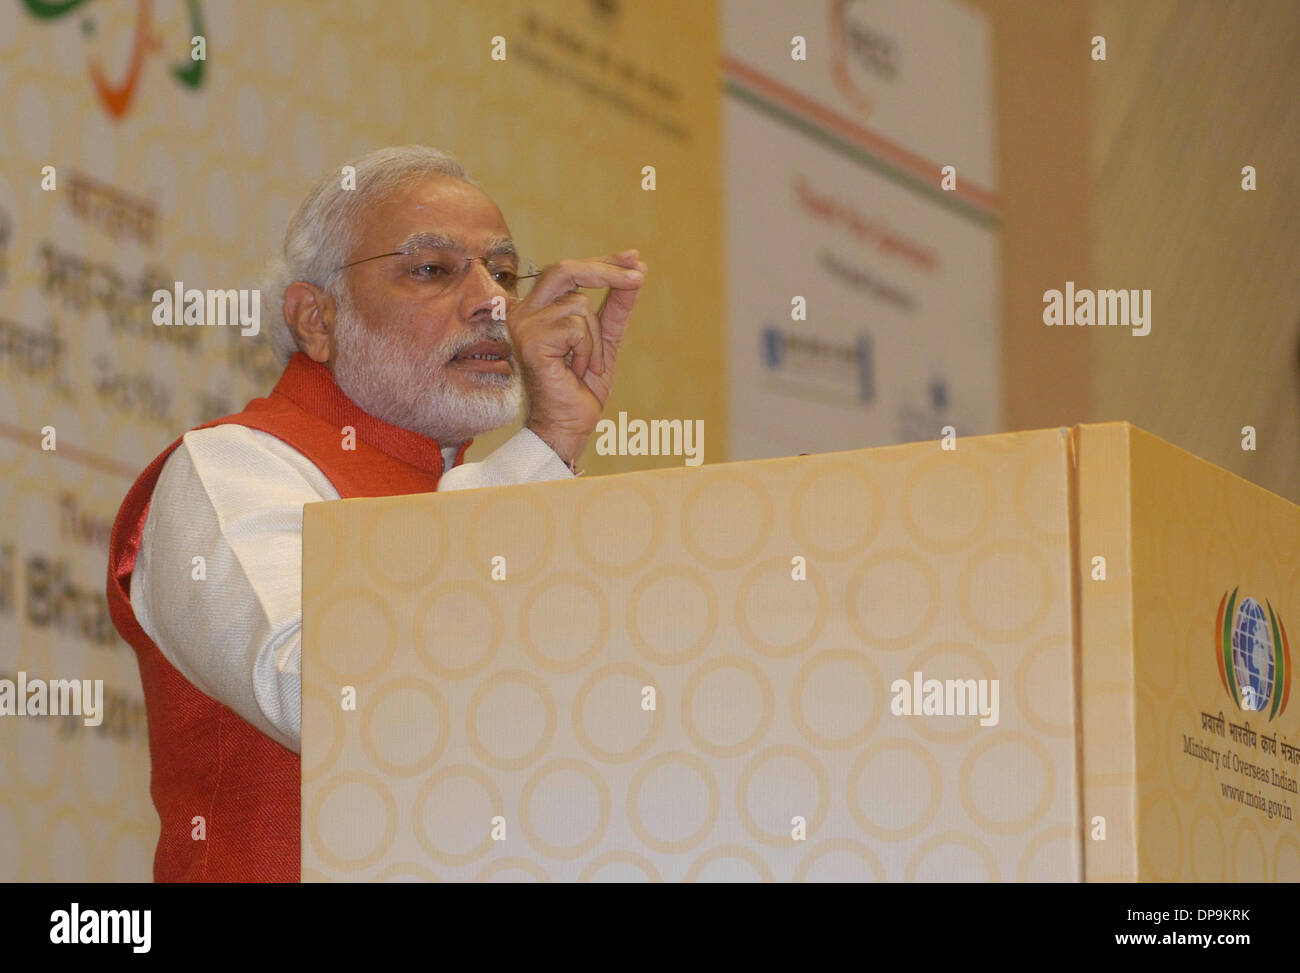 New Delhi, India. 10th Jan, 2014. Narendra Modi, India's main opposition Bharatiya Janata Party's prime ministerial candidate for the 2014 general elections, addresses the Pravasi Bharatiya Divas, the world's largest gathering of Indian diaspora in the national capital, at Vigyan Bhavan in New Delhi, India, Jan. 9, 2014. Narendra Modi, Thursday snubbed Prime Minister Manmohan Singh by saying he agreed with the country's leader that good times would come, but after the next general elections. © Partha Sarkar/Xinhua/Alamy Live News Stock Photo